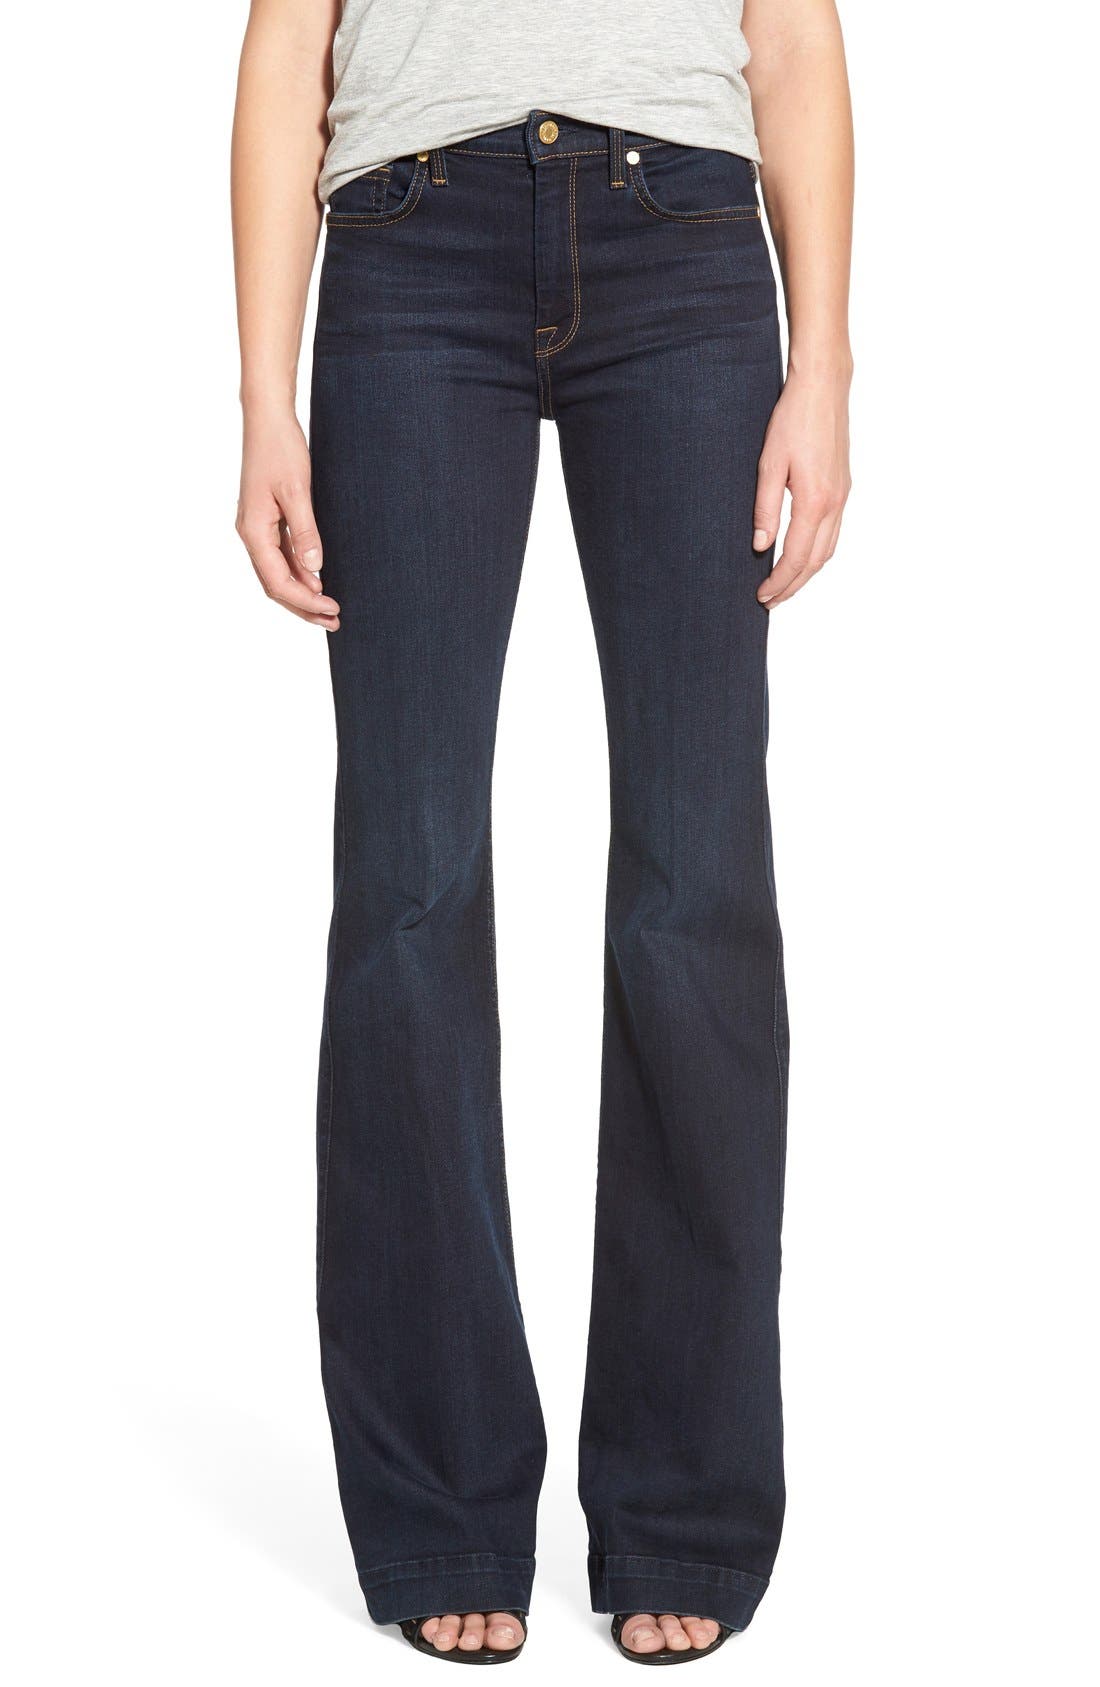 7 for all mankind ginger flare